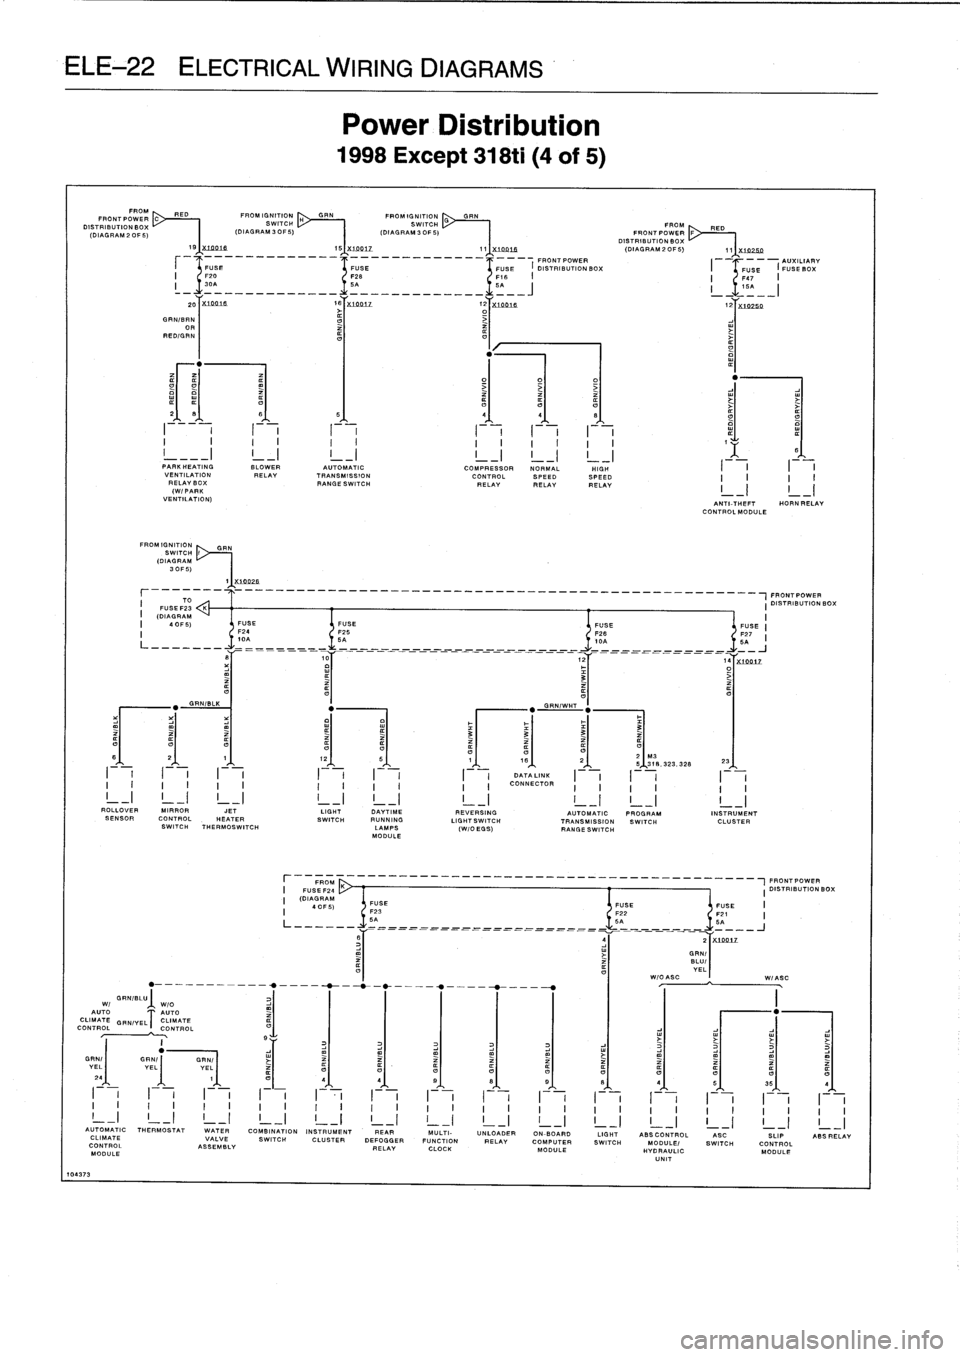 BMW 325i 1994 E36 Service Manual 
ELE-22

ELECTRICAL
WIRING
DIAGRAMS

GRNIBLU
Wl

WIO

AUTO

AUTO

CLIMATE

GEN/YELT
CLIMATE

CONTROL

CONTROL

10437
3

FP

OM~
	

PED
FRONTPOWER
DISTRIBUTION

BOY%

(DIAGRAM

2
OF
5)

S

FROMIGNITION